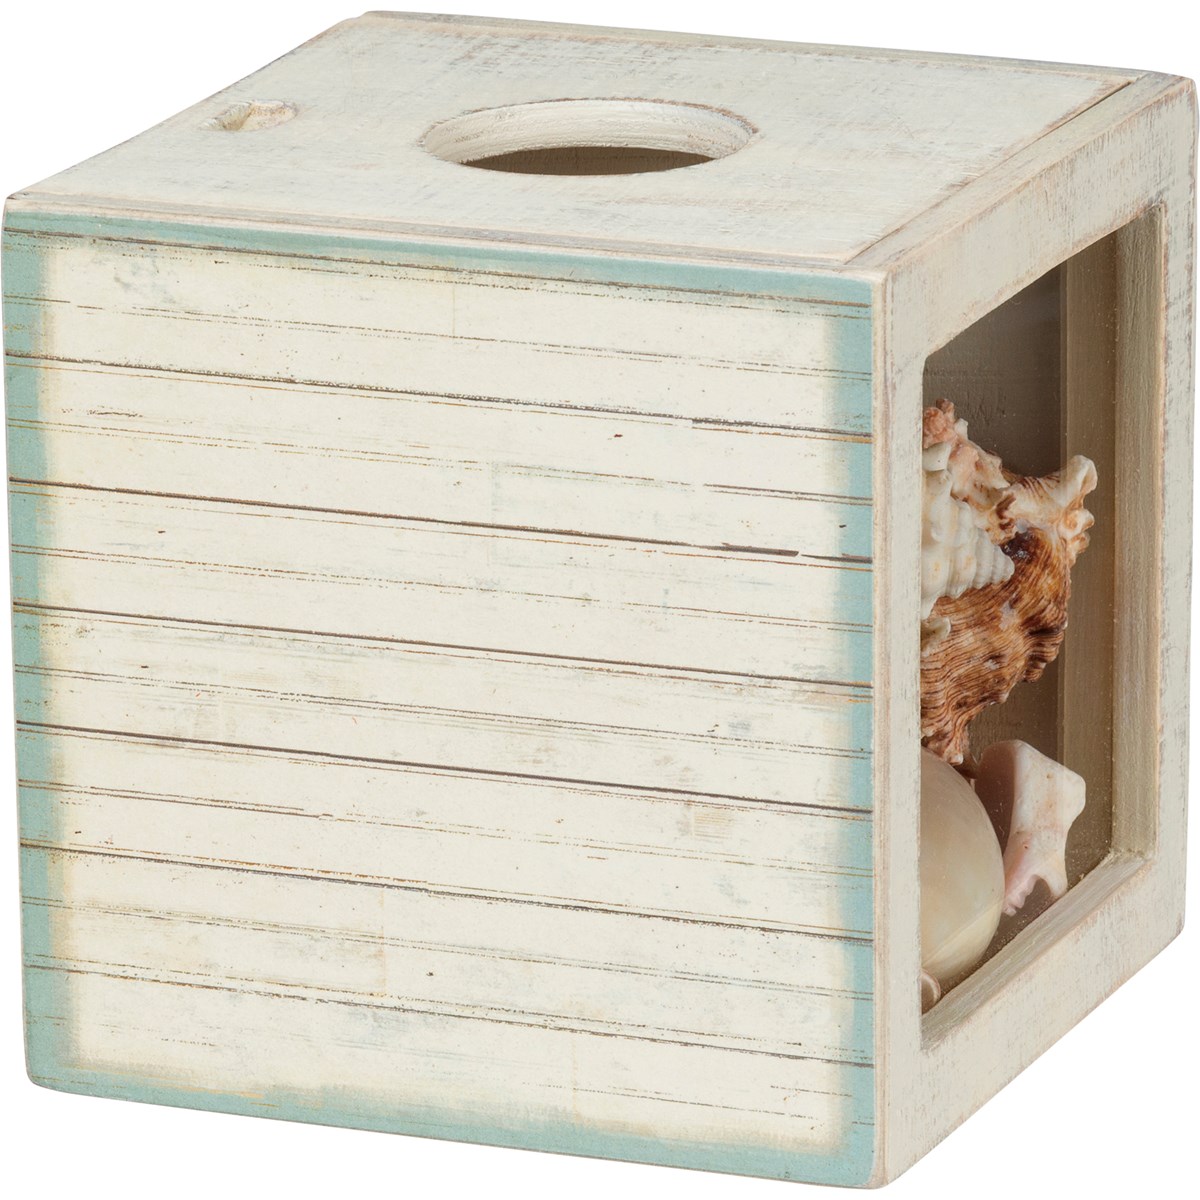 Sea Shell Has A Story Rustic Shell Holder - Wood, Paper, Glass